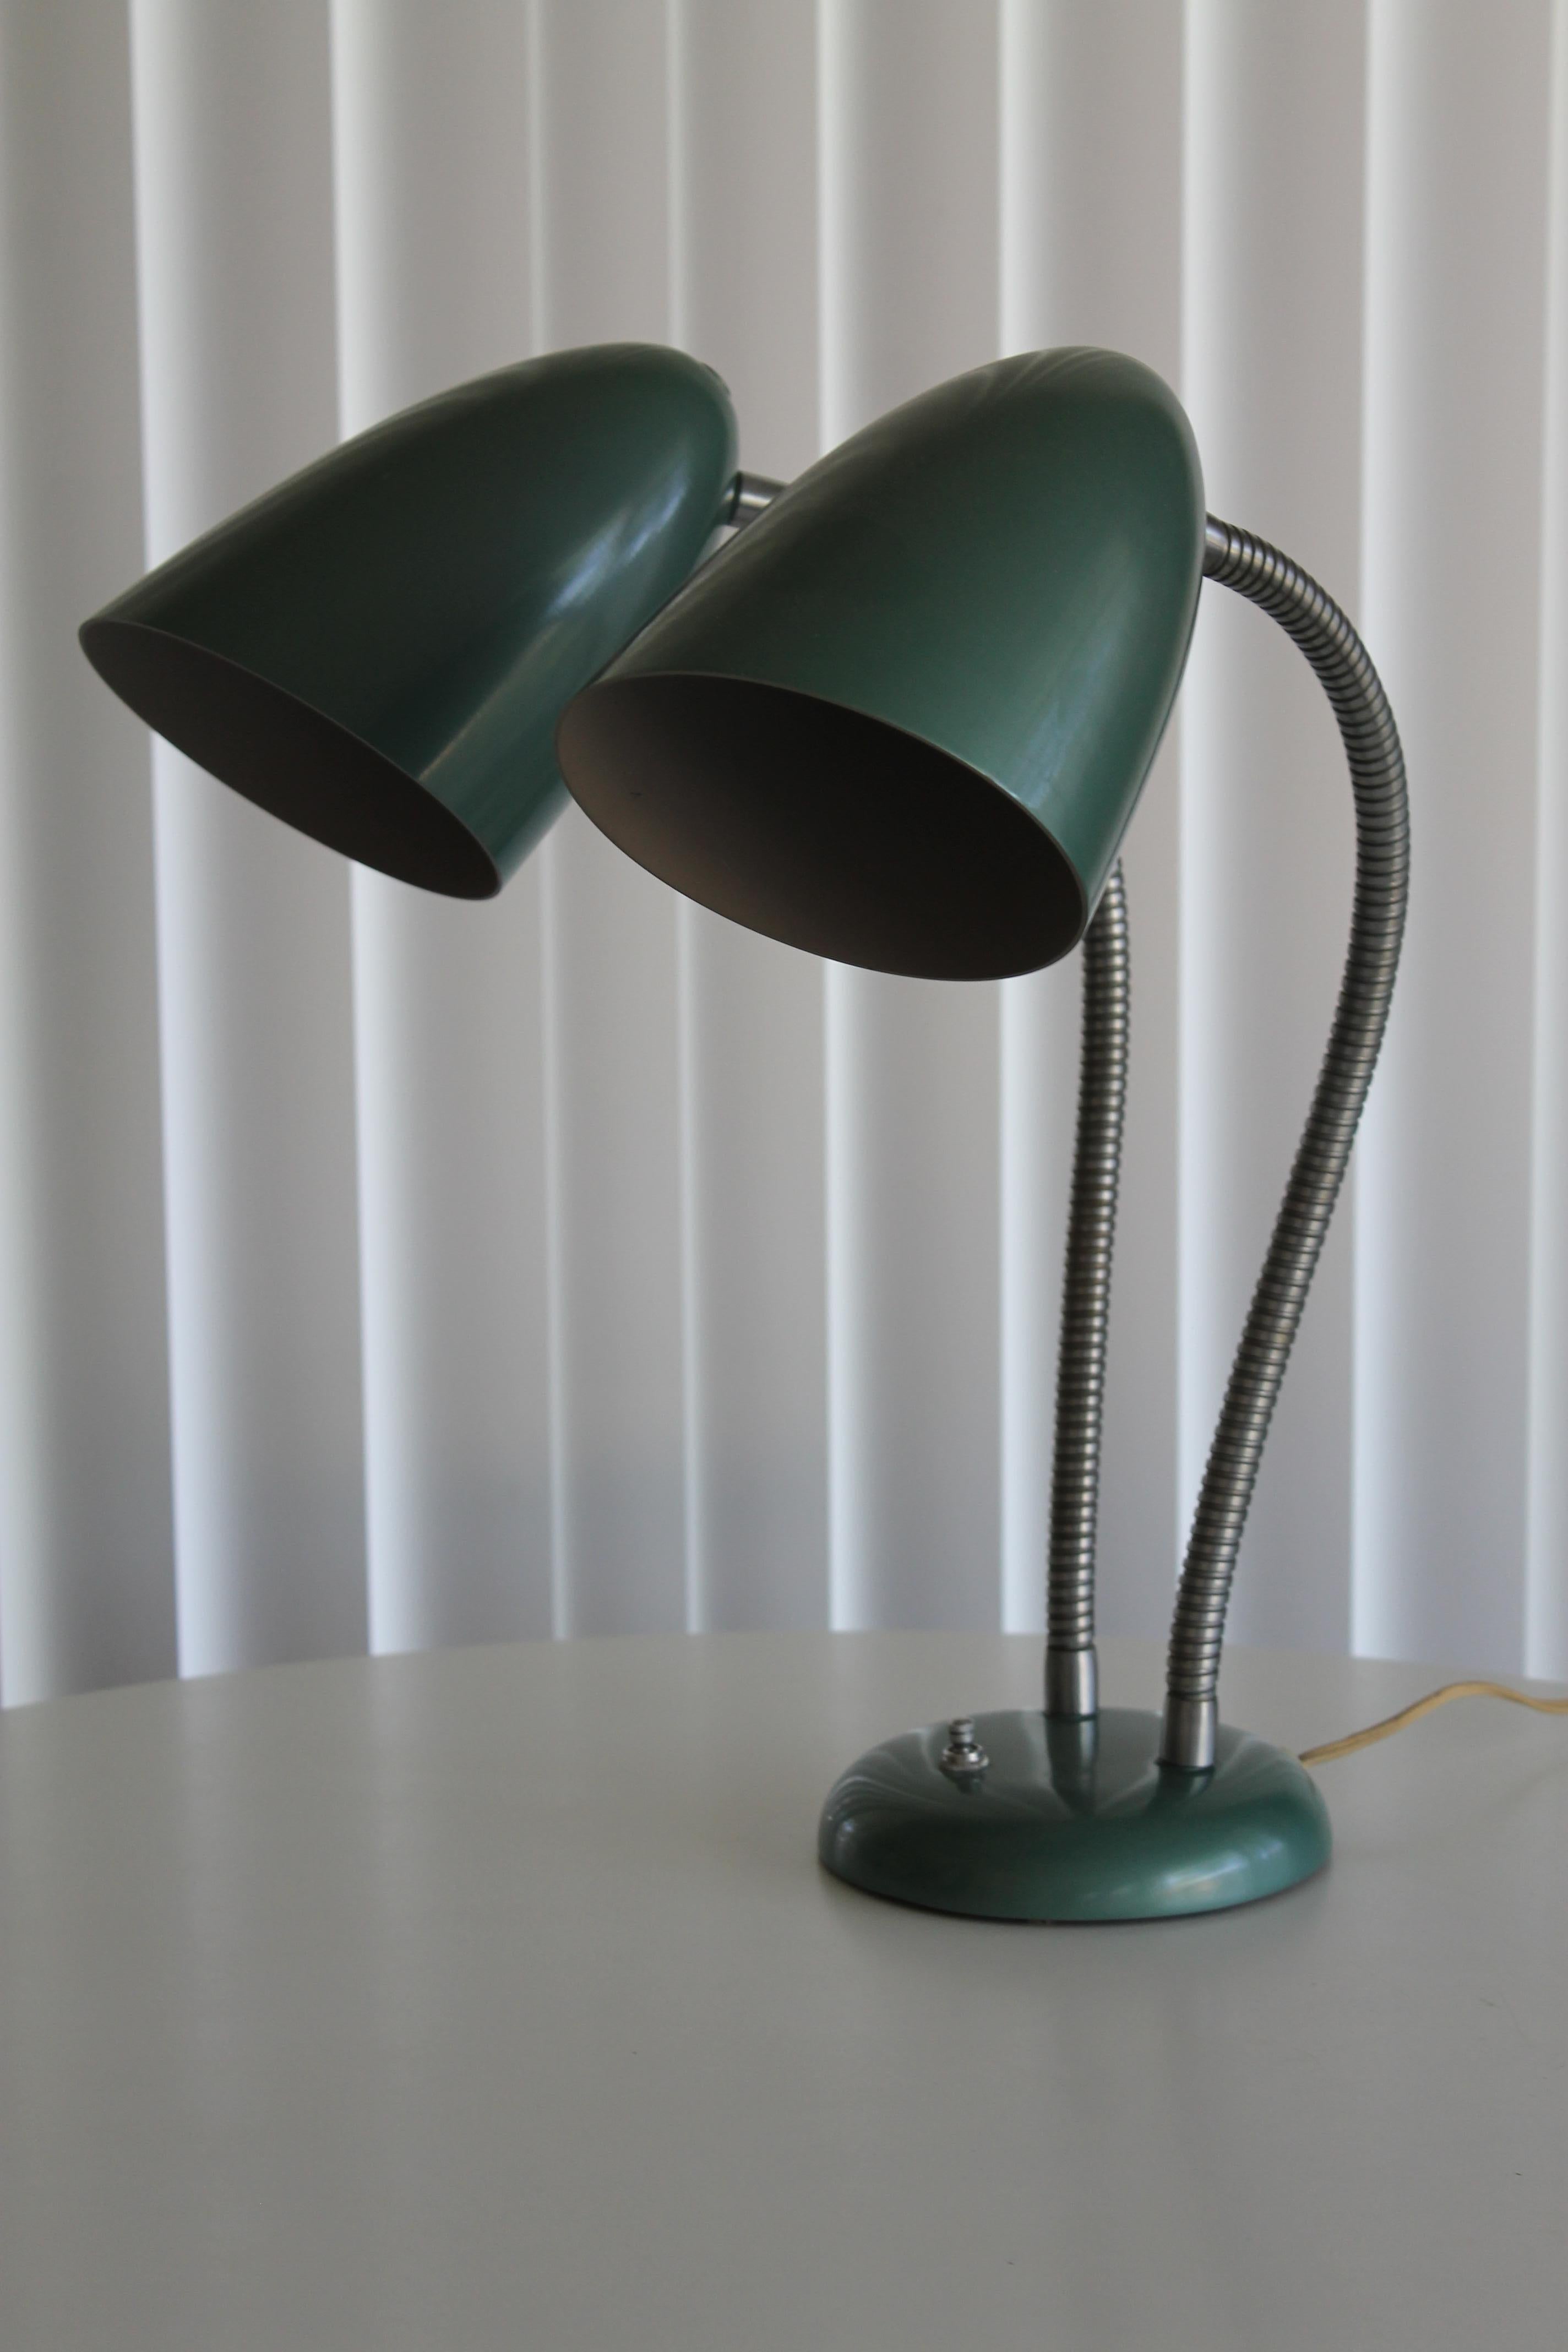 A double gooseneck desk lamp with original metallic green finish and chromed goosenecks. Lamp is in amazing original condition, with only two almost invisible scratches to the finish on one bullet cone. The turn switch on the base has a four way